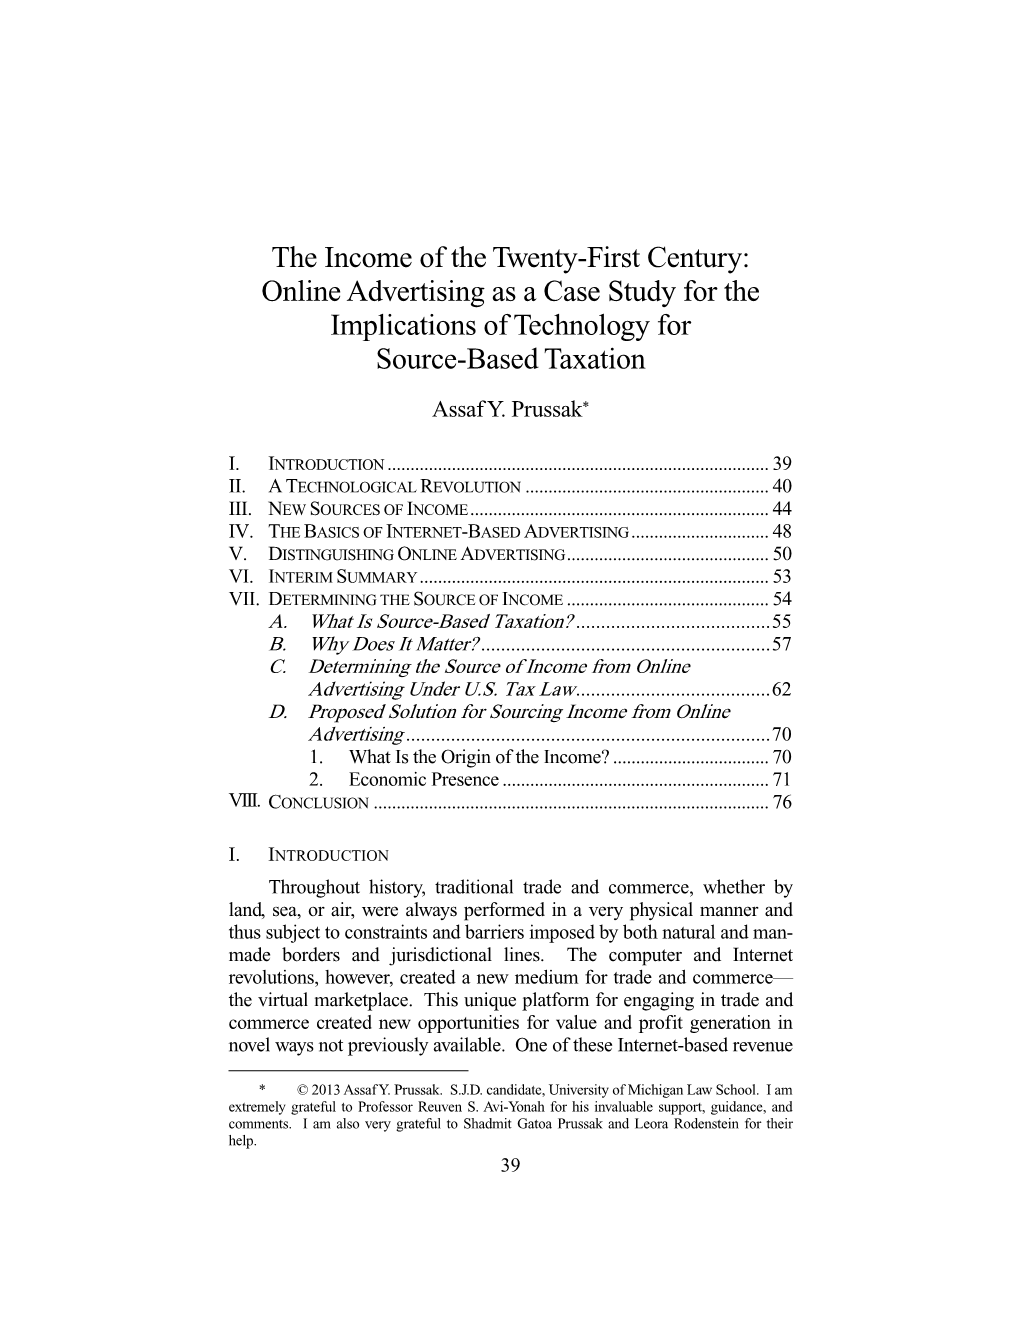 The Income of the Twenty-First Century: Online Advertising As a Case Study for the Implications of Technology for Source-Based Taxation